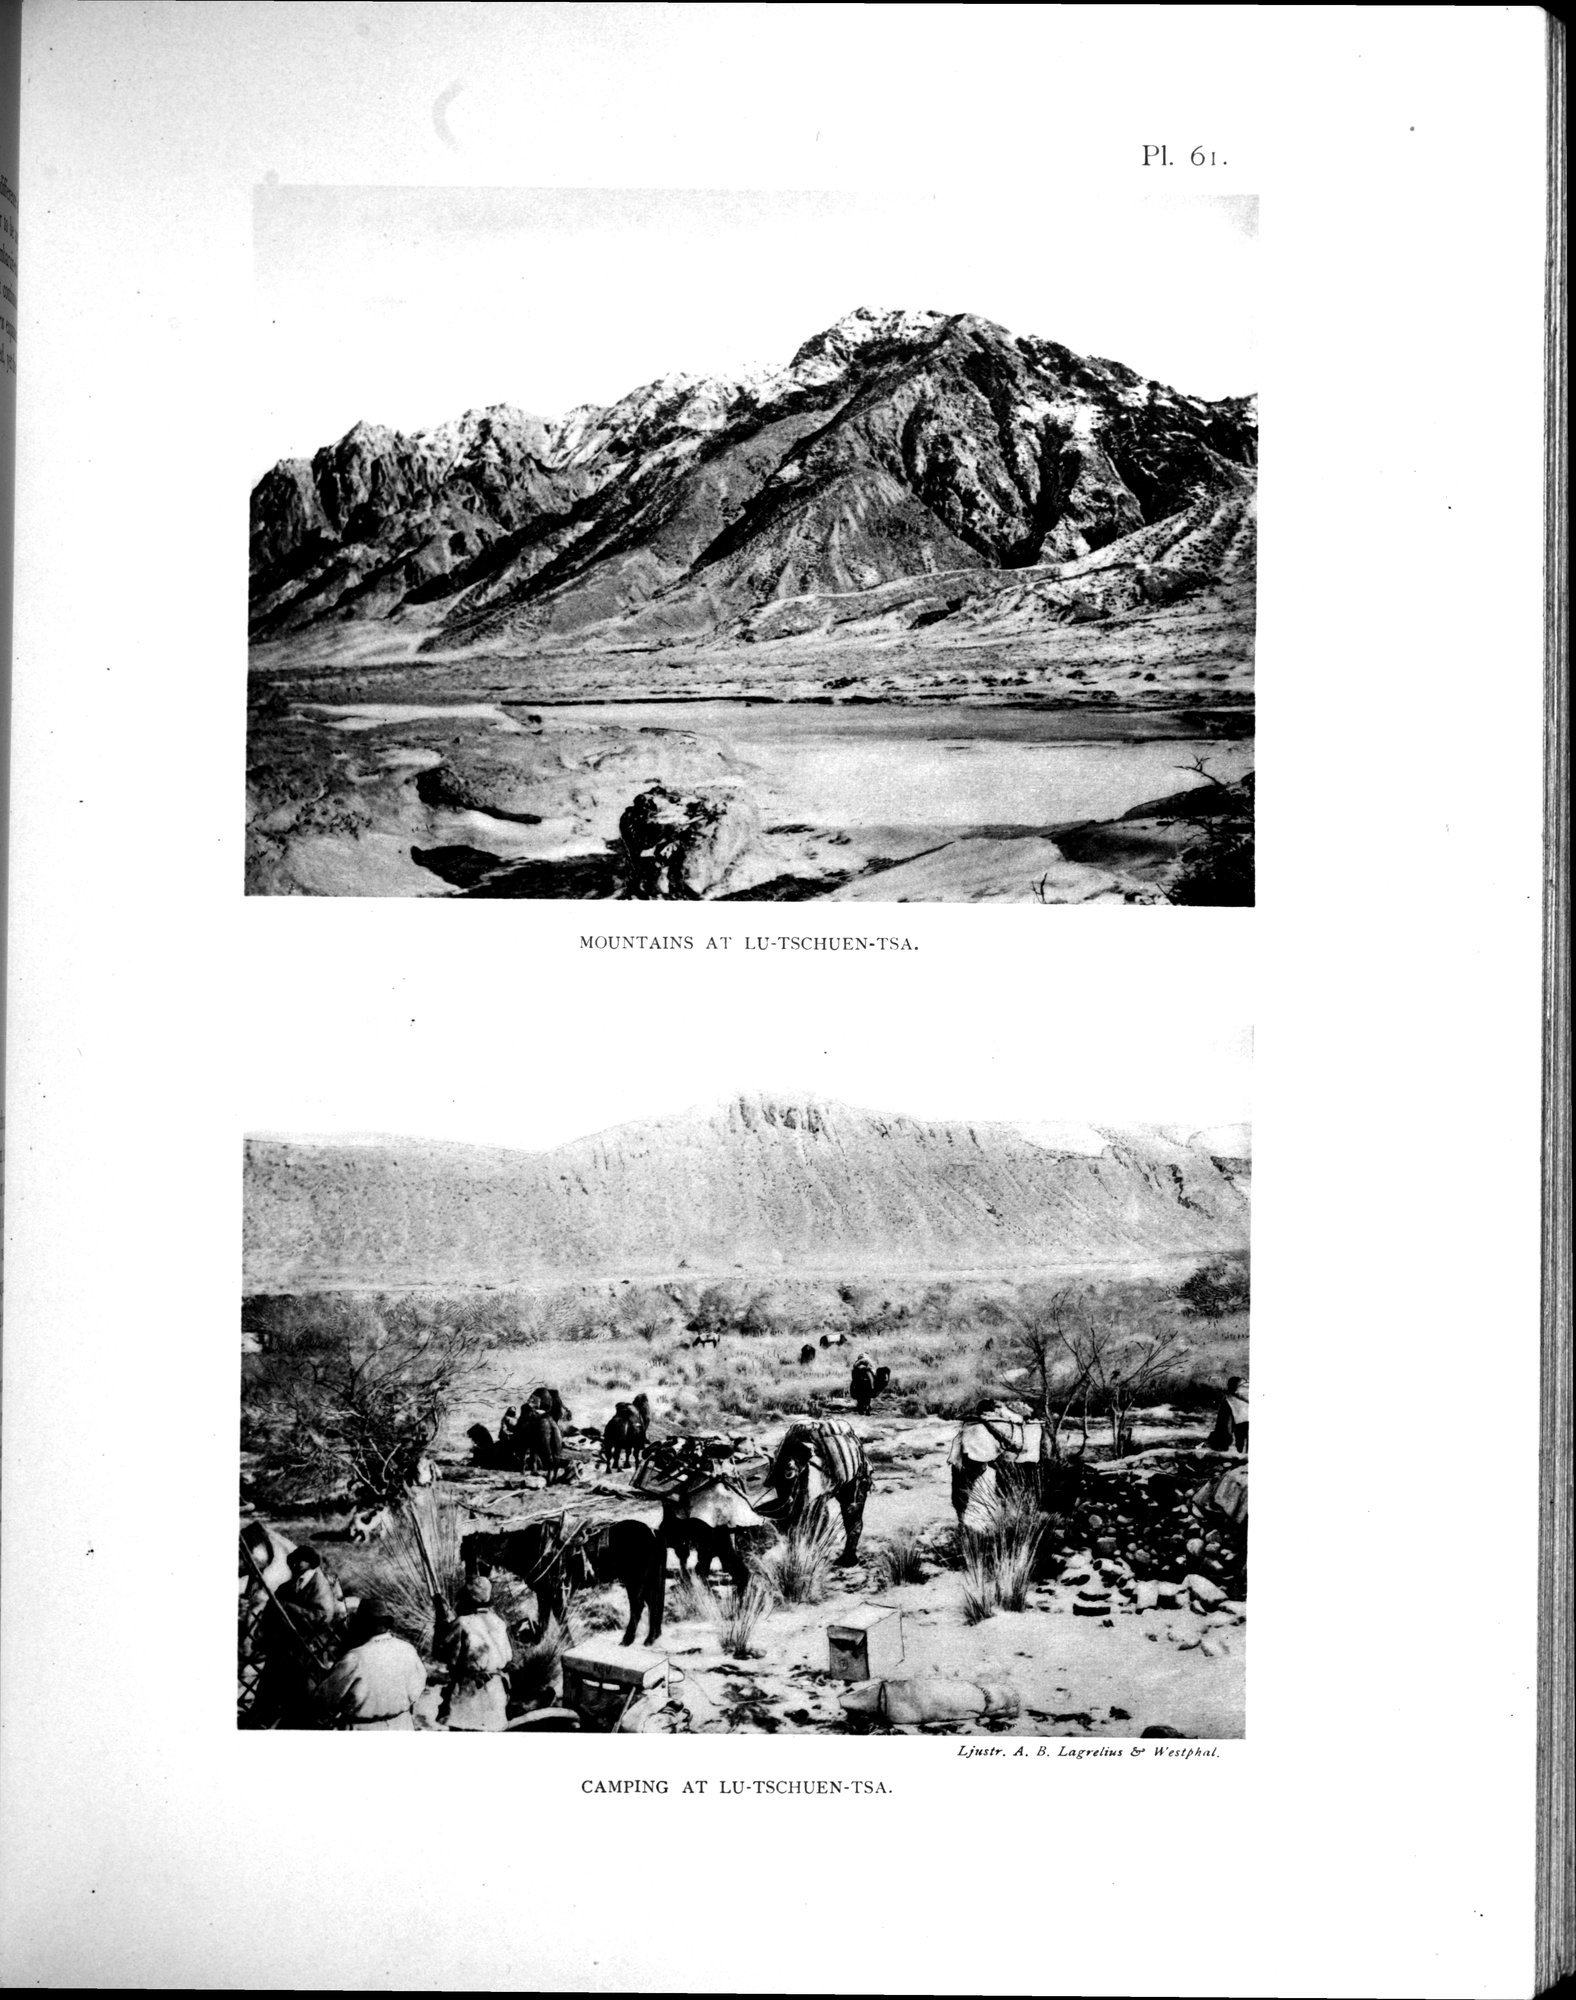 Scientific Results of a Journey in Central Asia, 1899-1902 : vol.3 / 539 ページ（白黒高解像度画像）